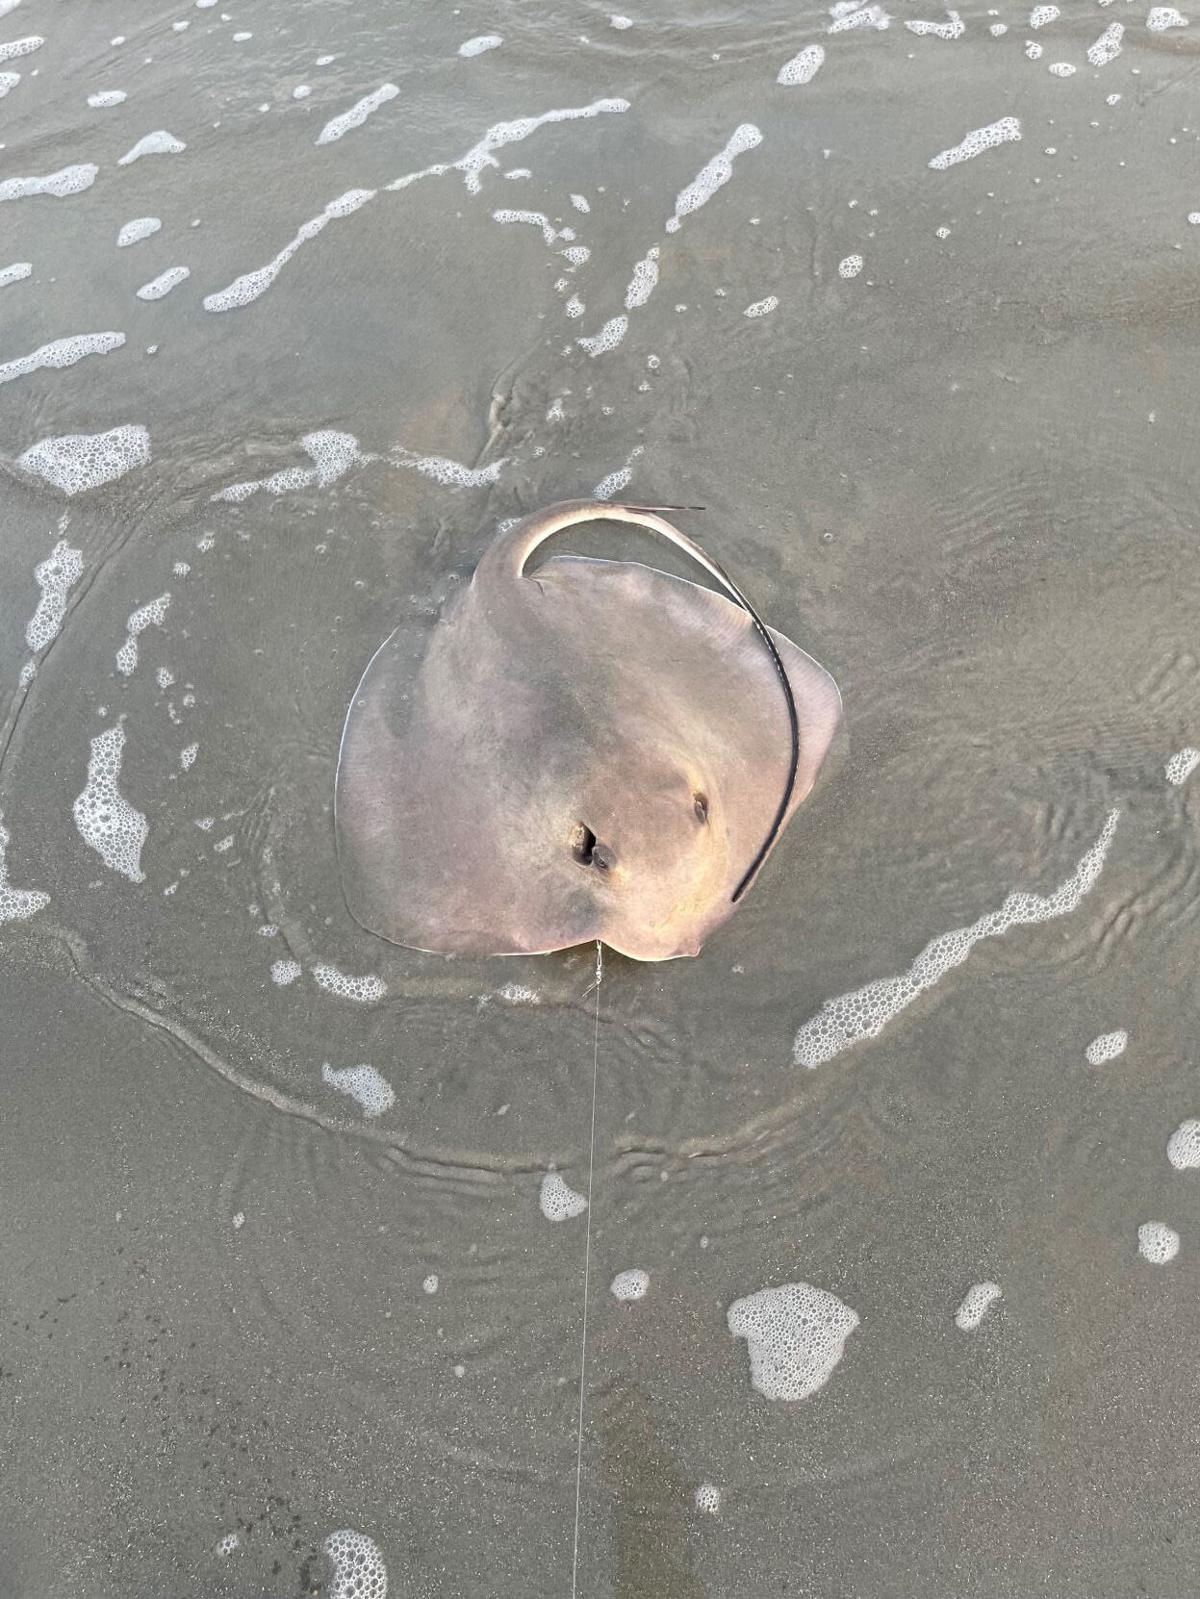 Shore fishers on Hilton Head pull up stingrays, strong feelings